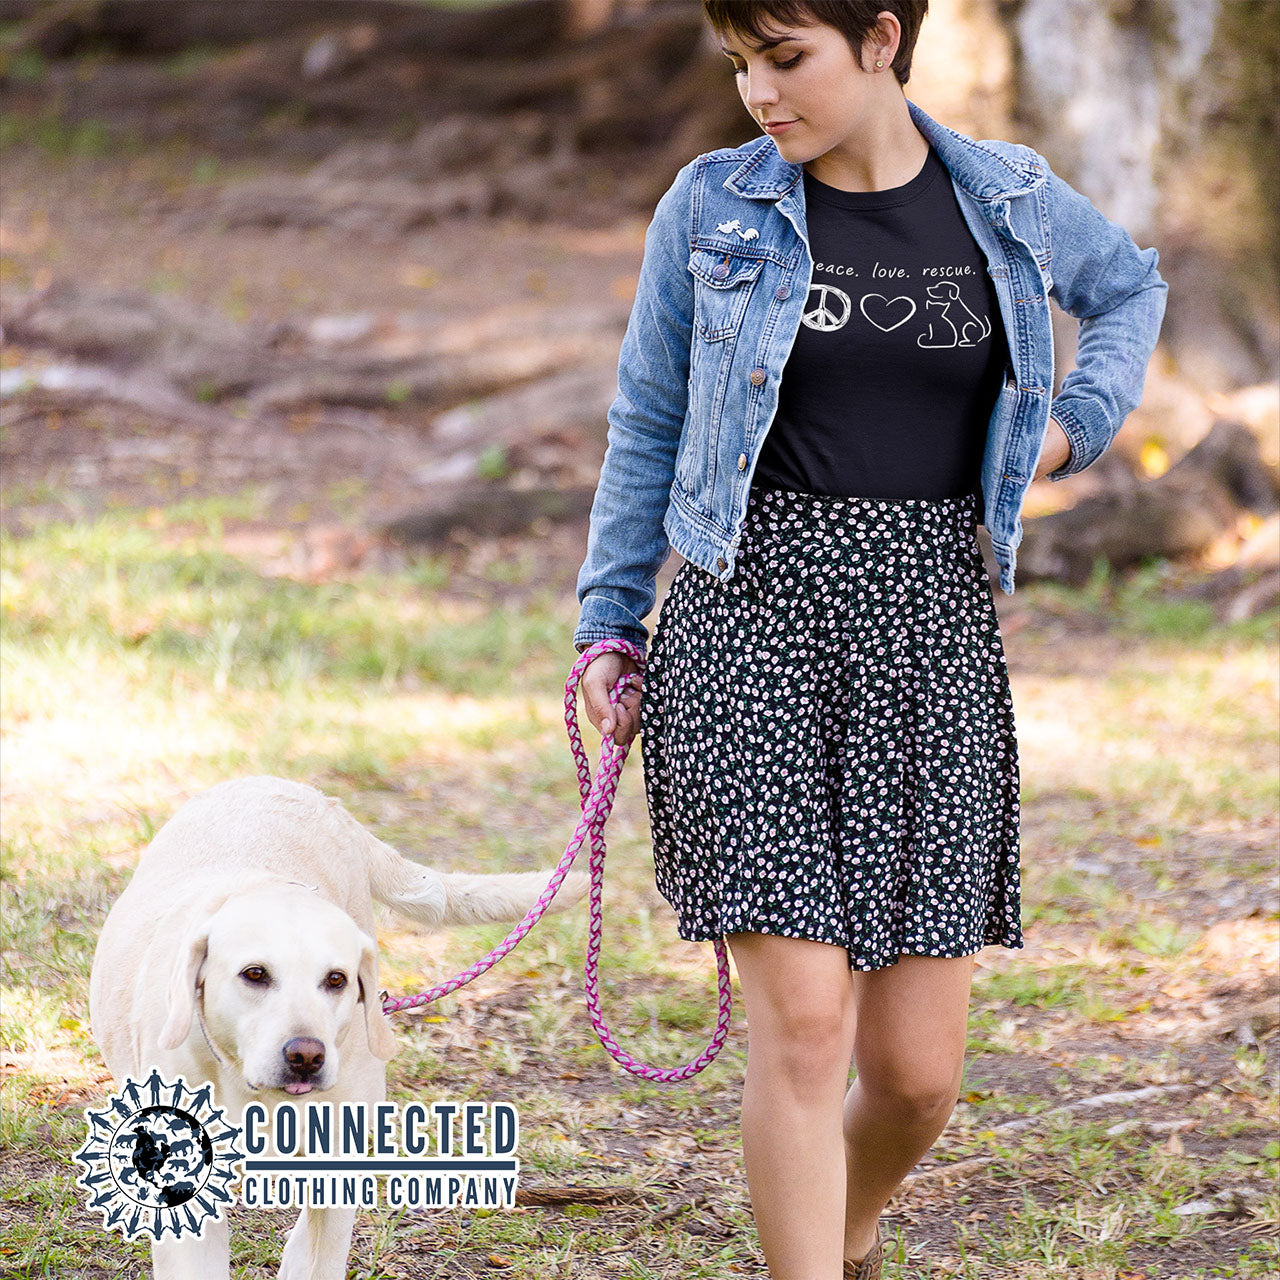 Model Walking Dog While Wearing Black Peace Love Rescue Short-Sleeve Tee - sweetsherriloudesigns - Ethically and Sustainably Made - 10% donated to Villalobos Animal Rescue Center